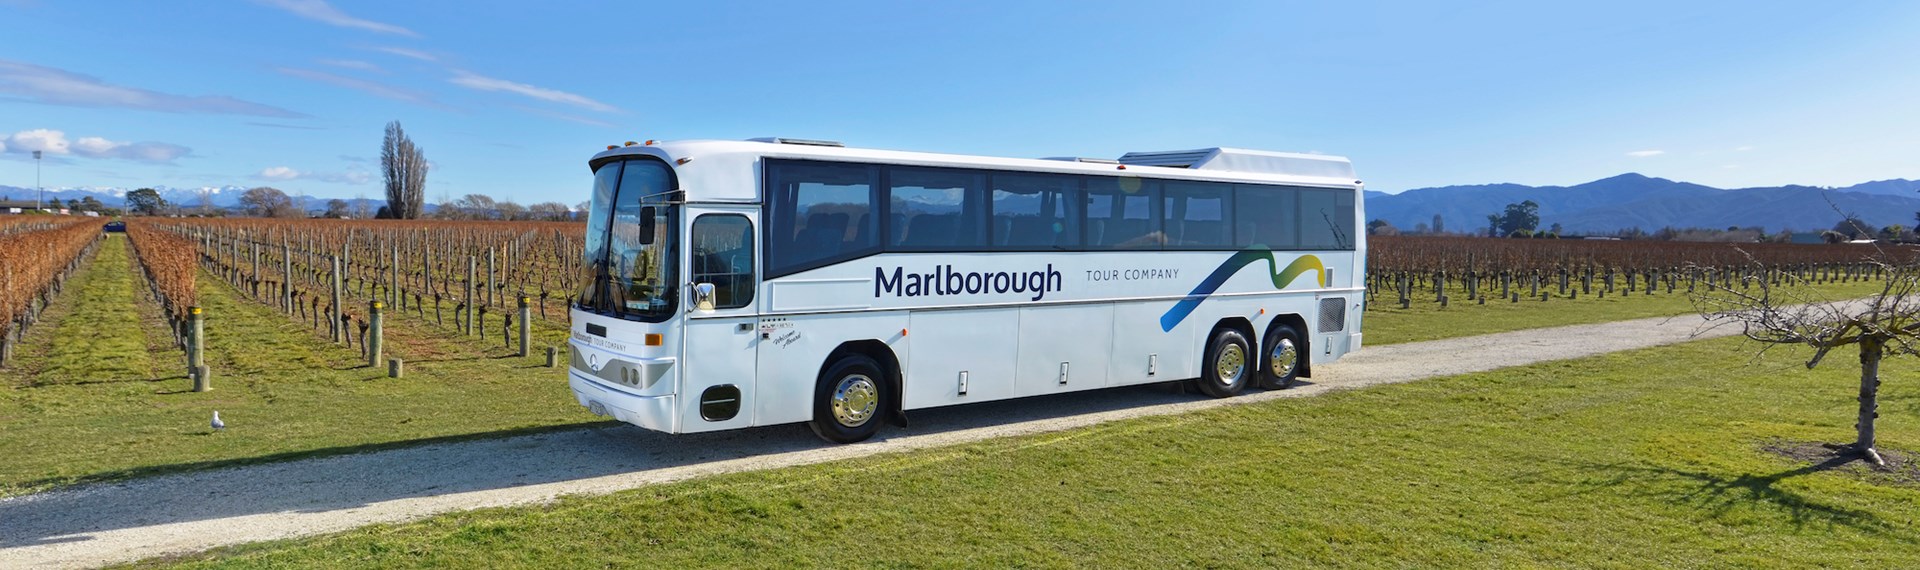 A Marlborough Tour Company coach parked in a vineyard in Blenheim, Marlborough at the top of New Zealand's South Island.